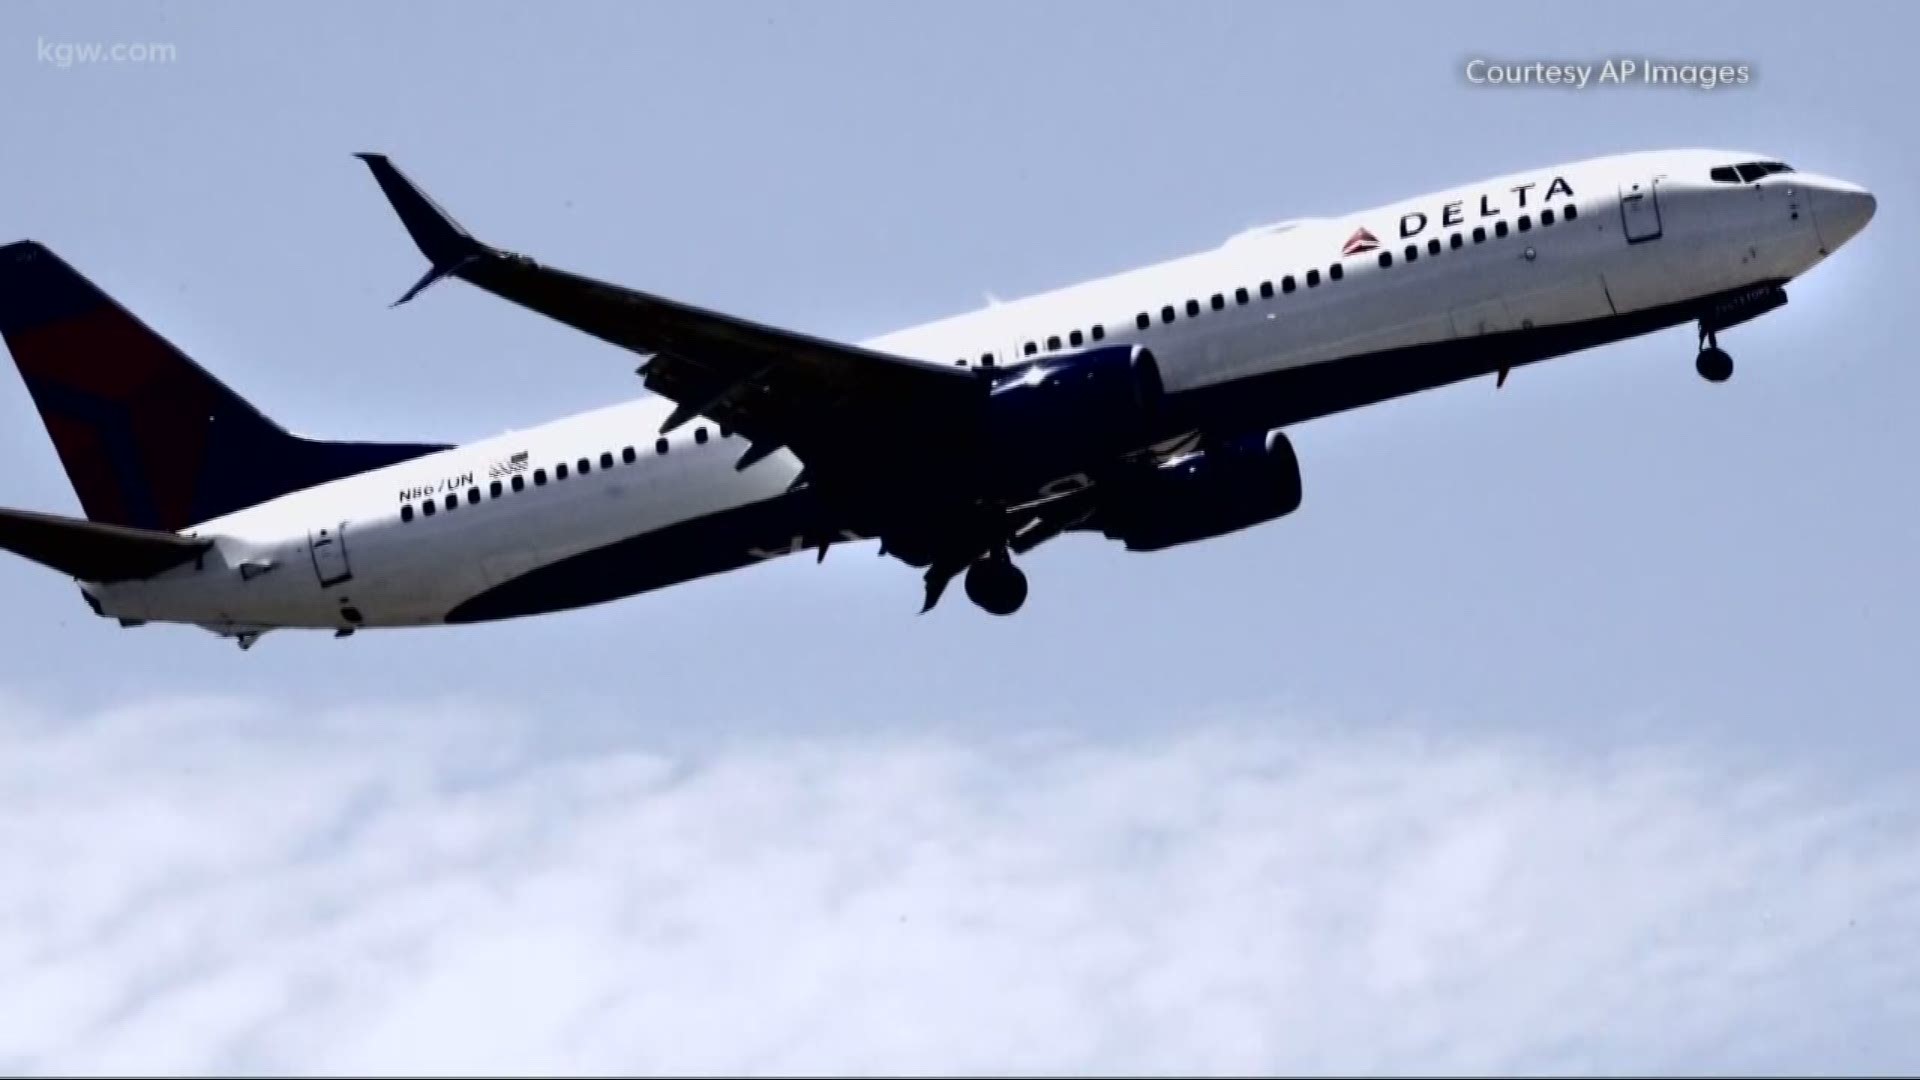 Why students are being forced to return Delta gift cards after getting bumped from a flight.